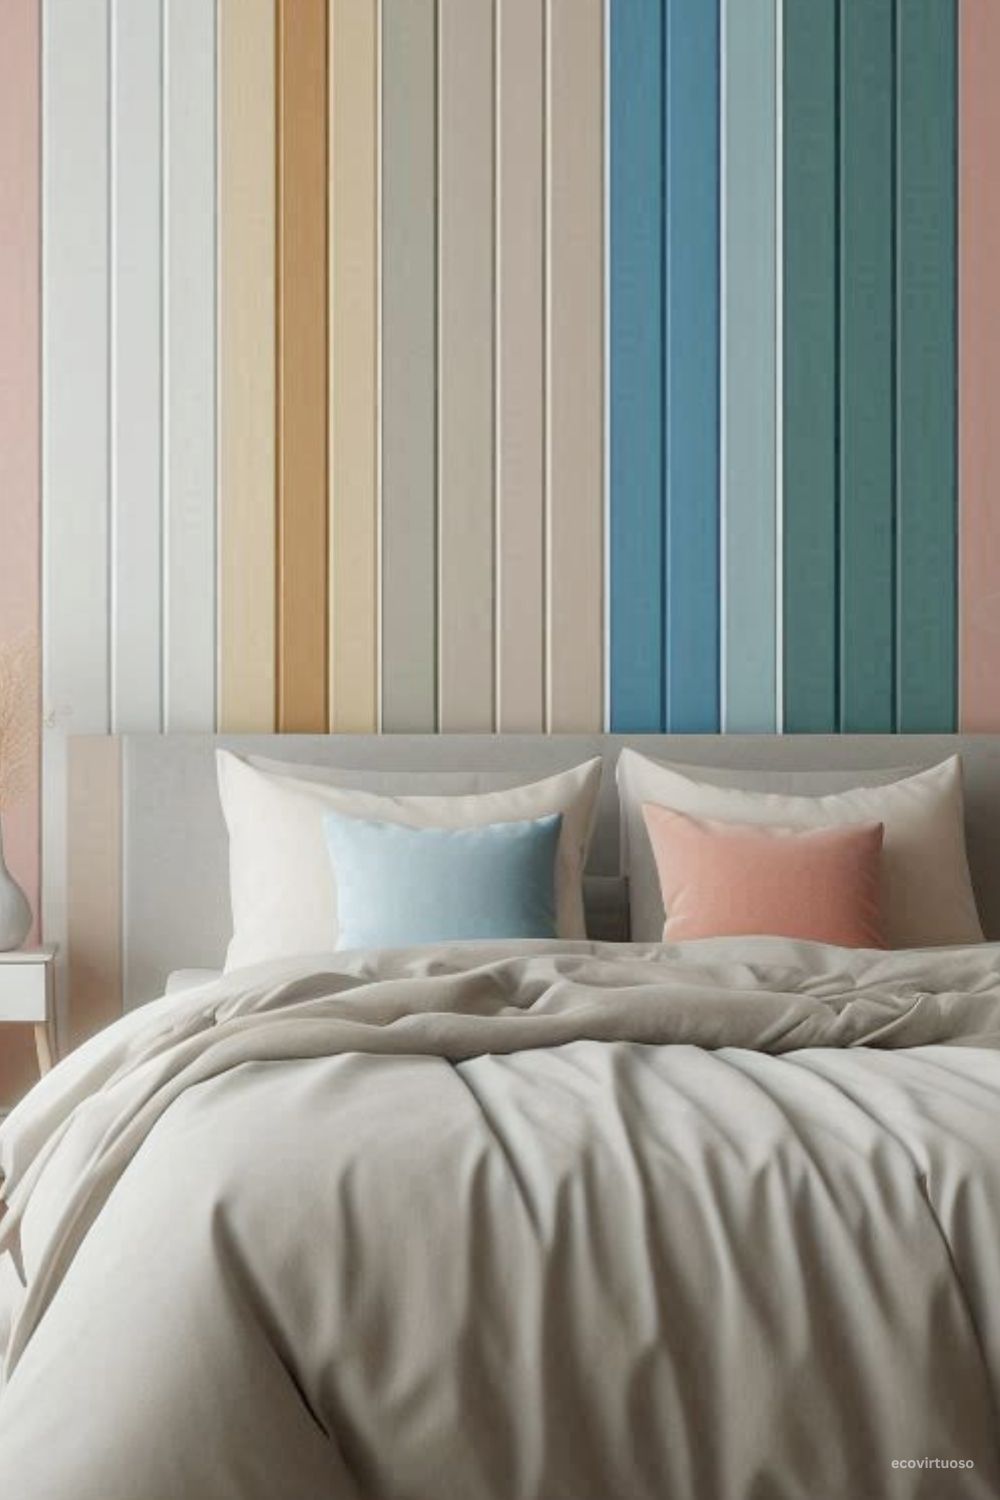 a wallpaper with vertical striped walls